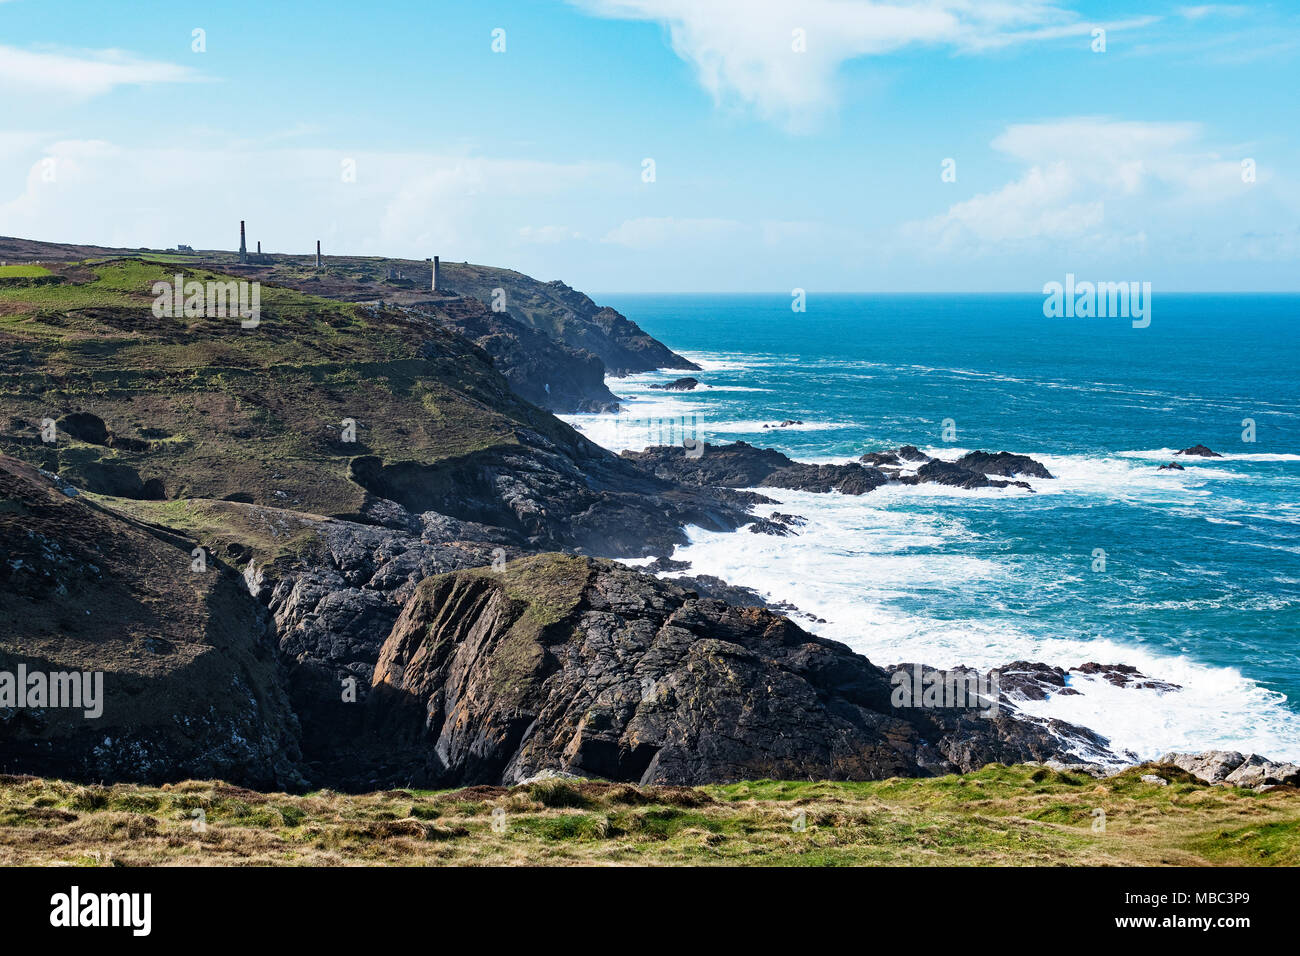 The coastline and tin mining landscape at pendeen in cornwall, england, uk, the area is a unesco world heritage site. Stock Photo